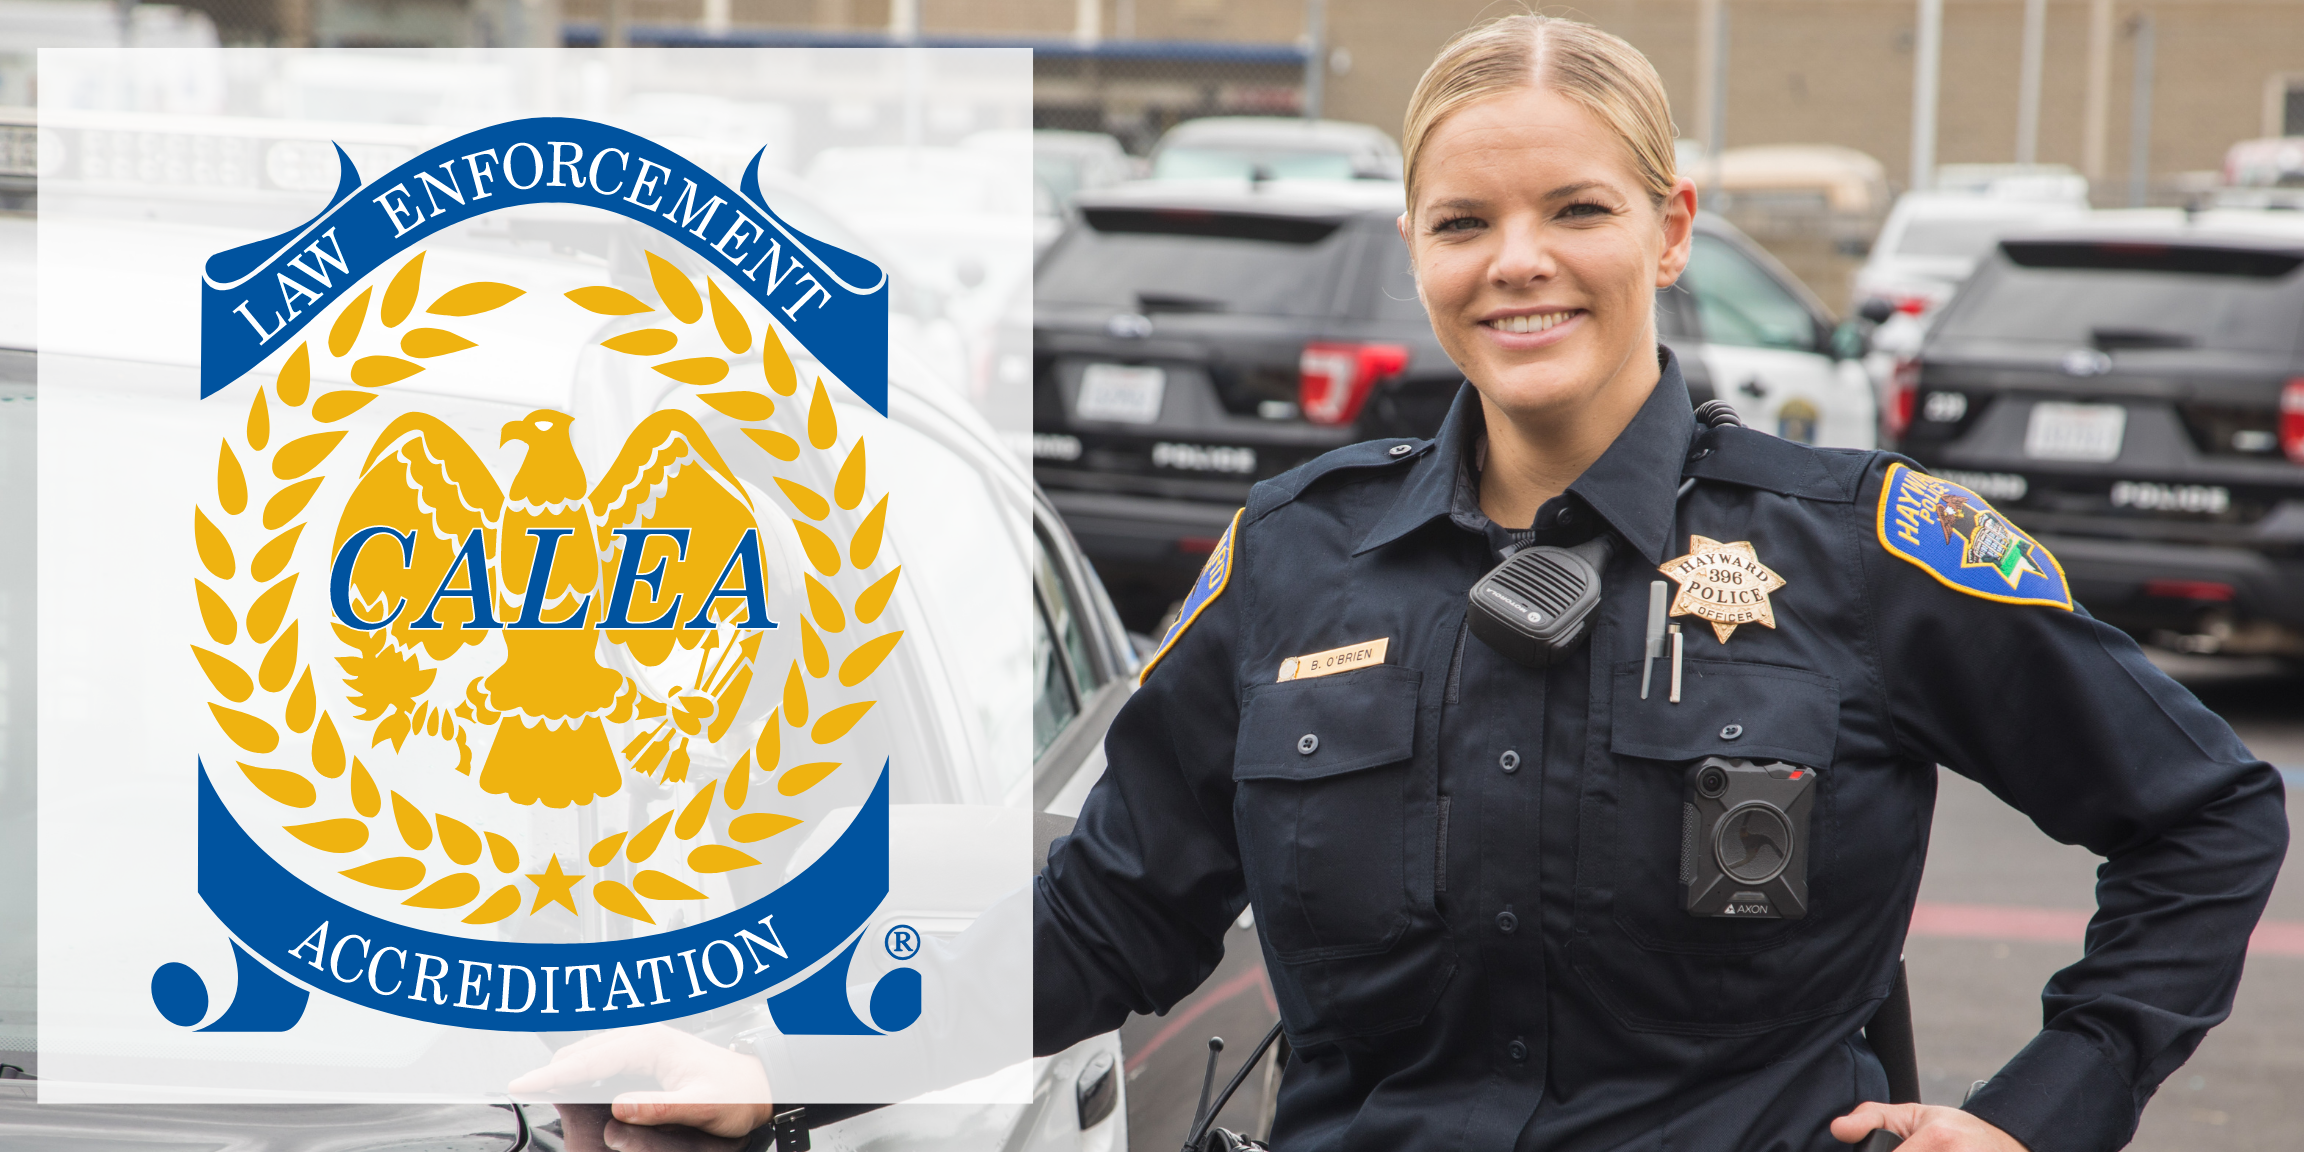 A female officer smiling standing next to their vehicle and the CALEA logo badge